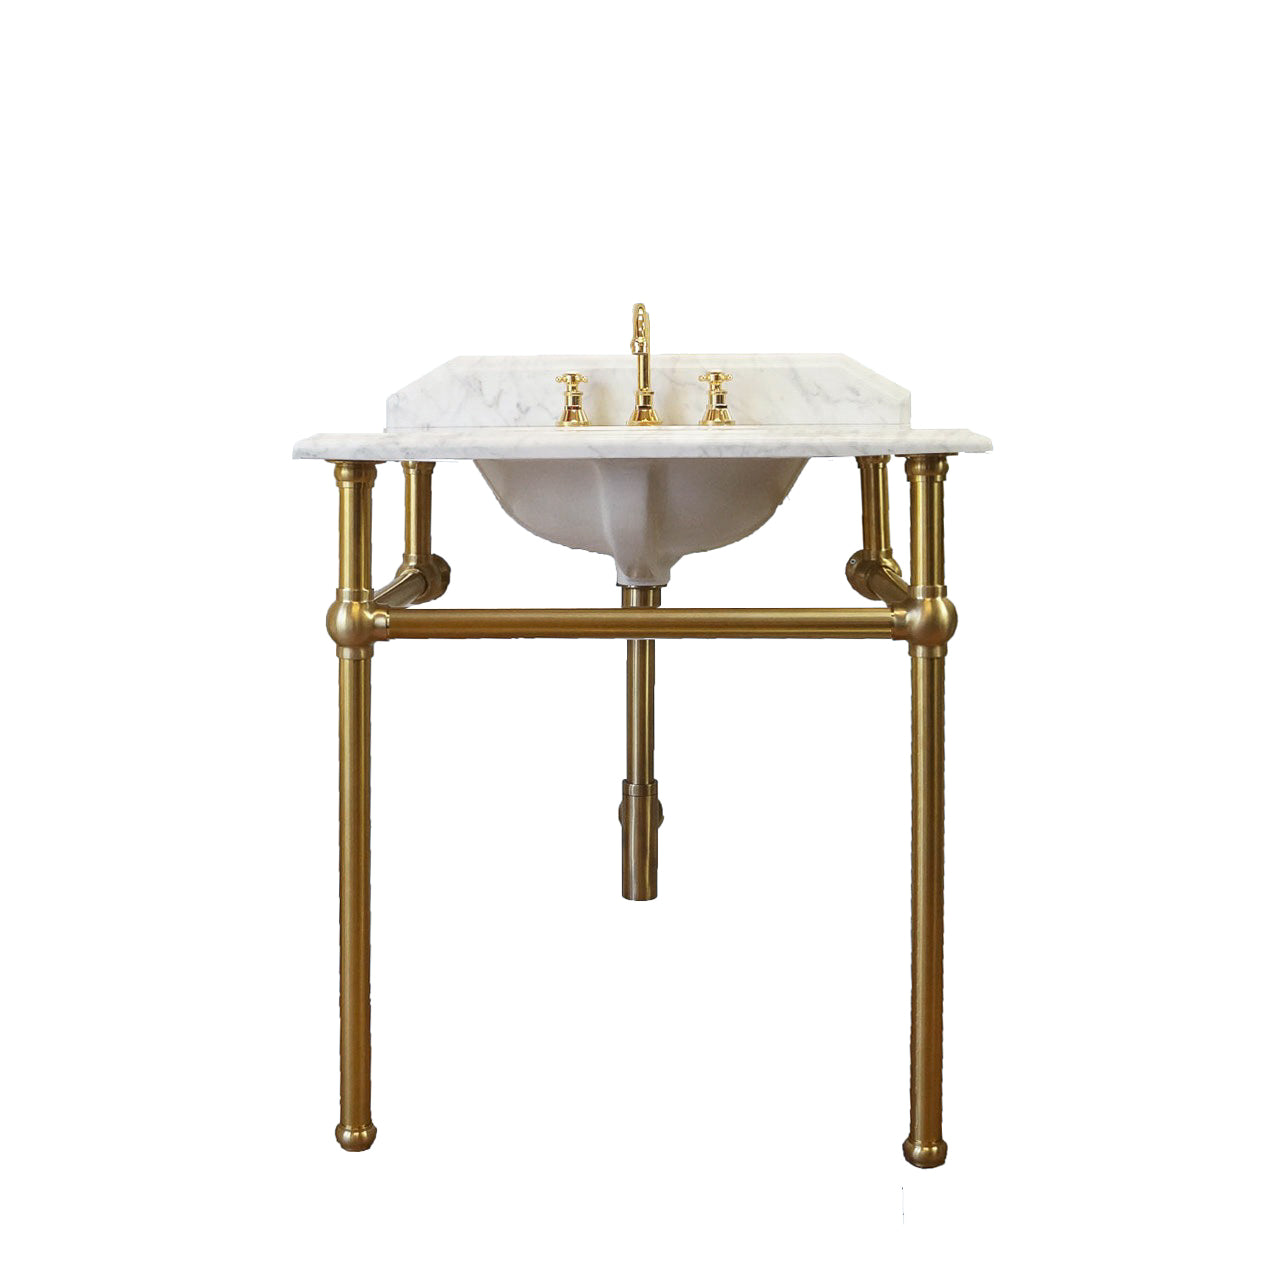 TURNER HASTINGS MAYER BASIN STAND WITH REAL CARRARA MARBLE TOP BRUSHED BRASS 750MM